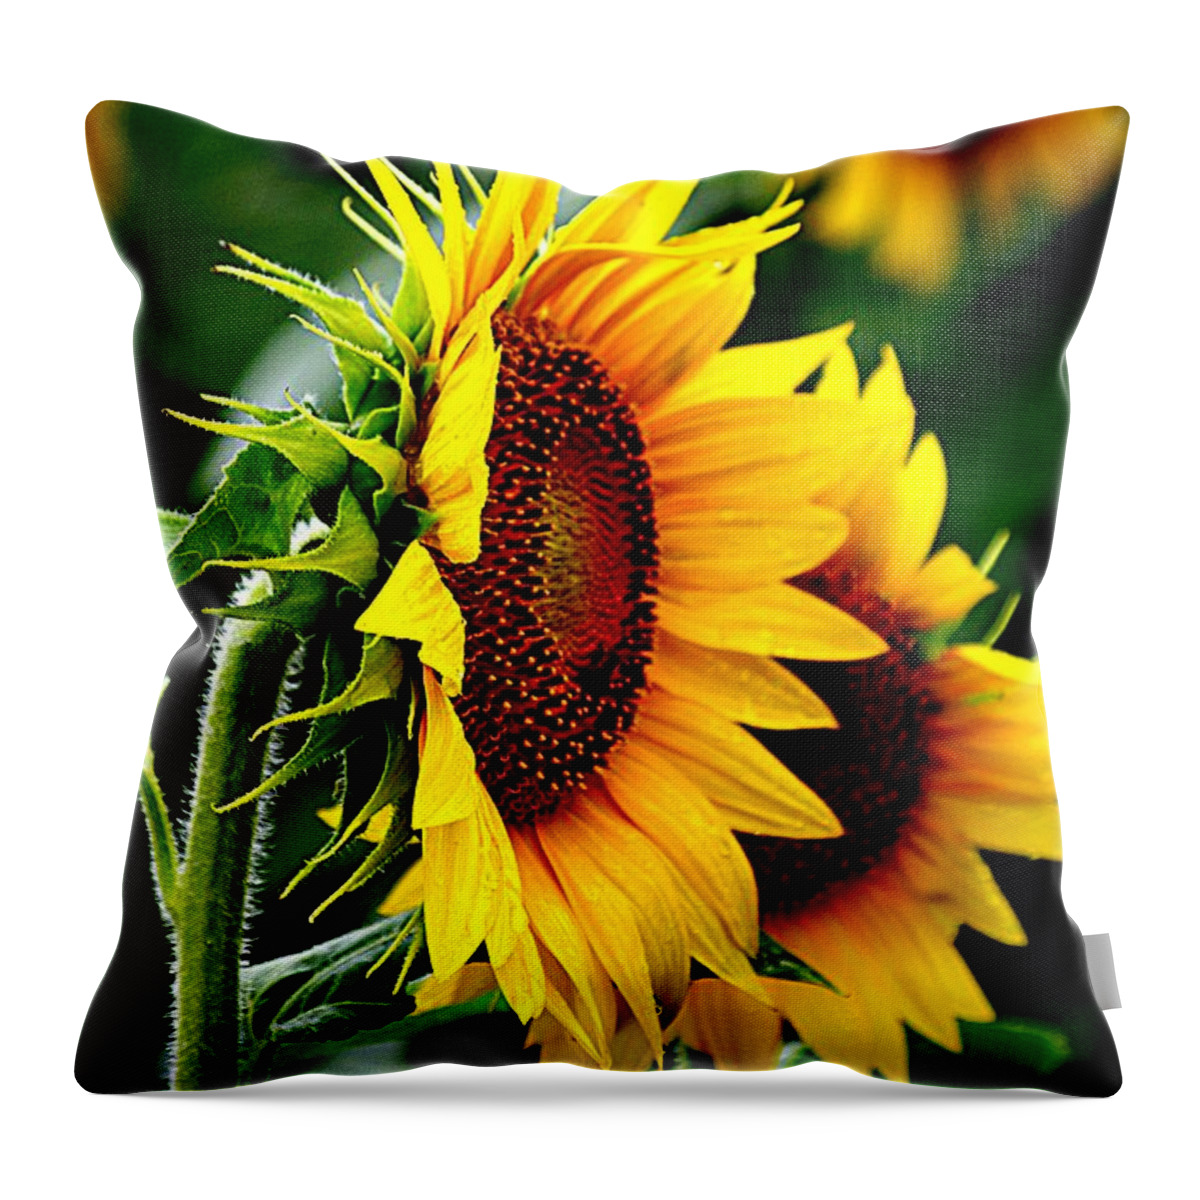 Yellow Sunflowers Throw Pillow featuring the photograph Turn to the Sun For Comfort by Karen McKenzie McAdoo